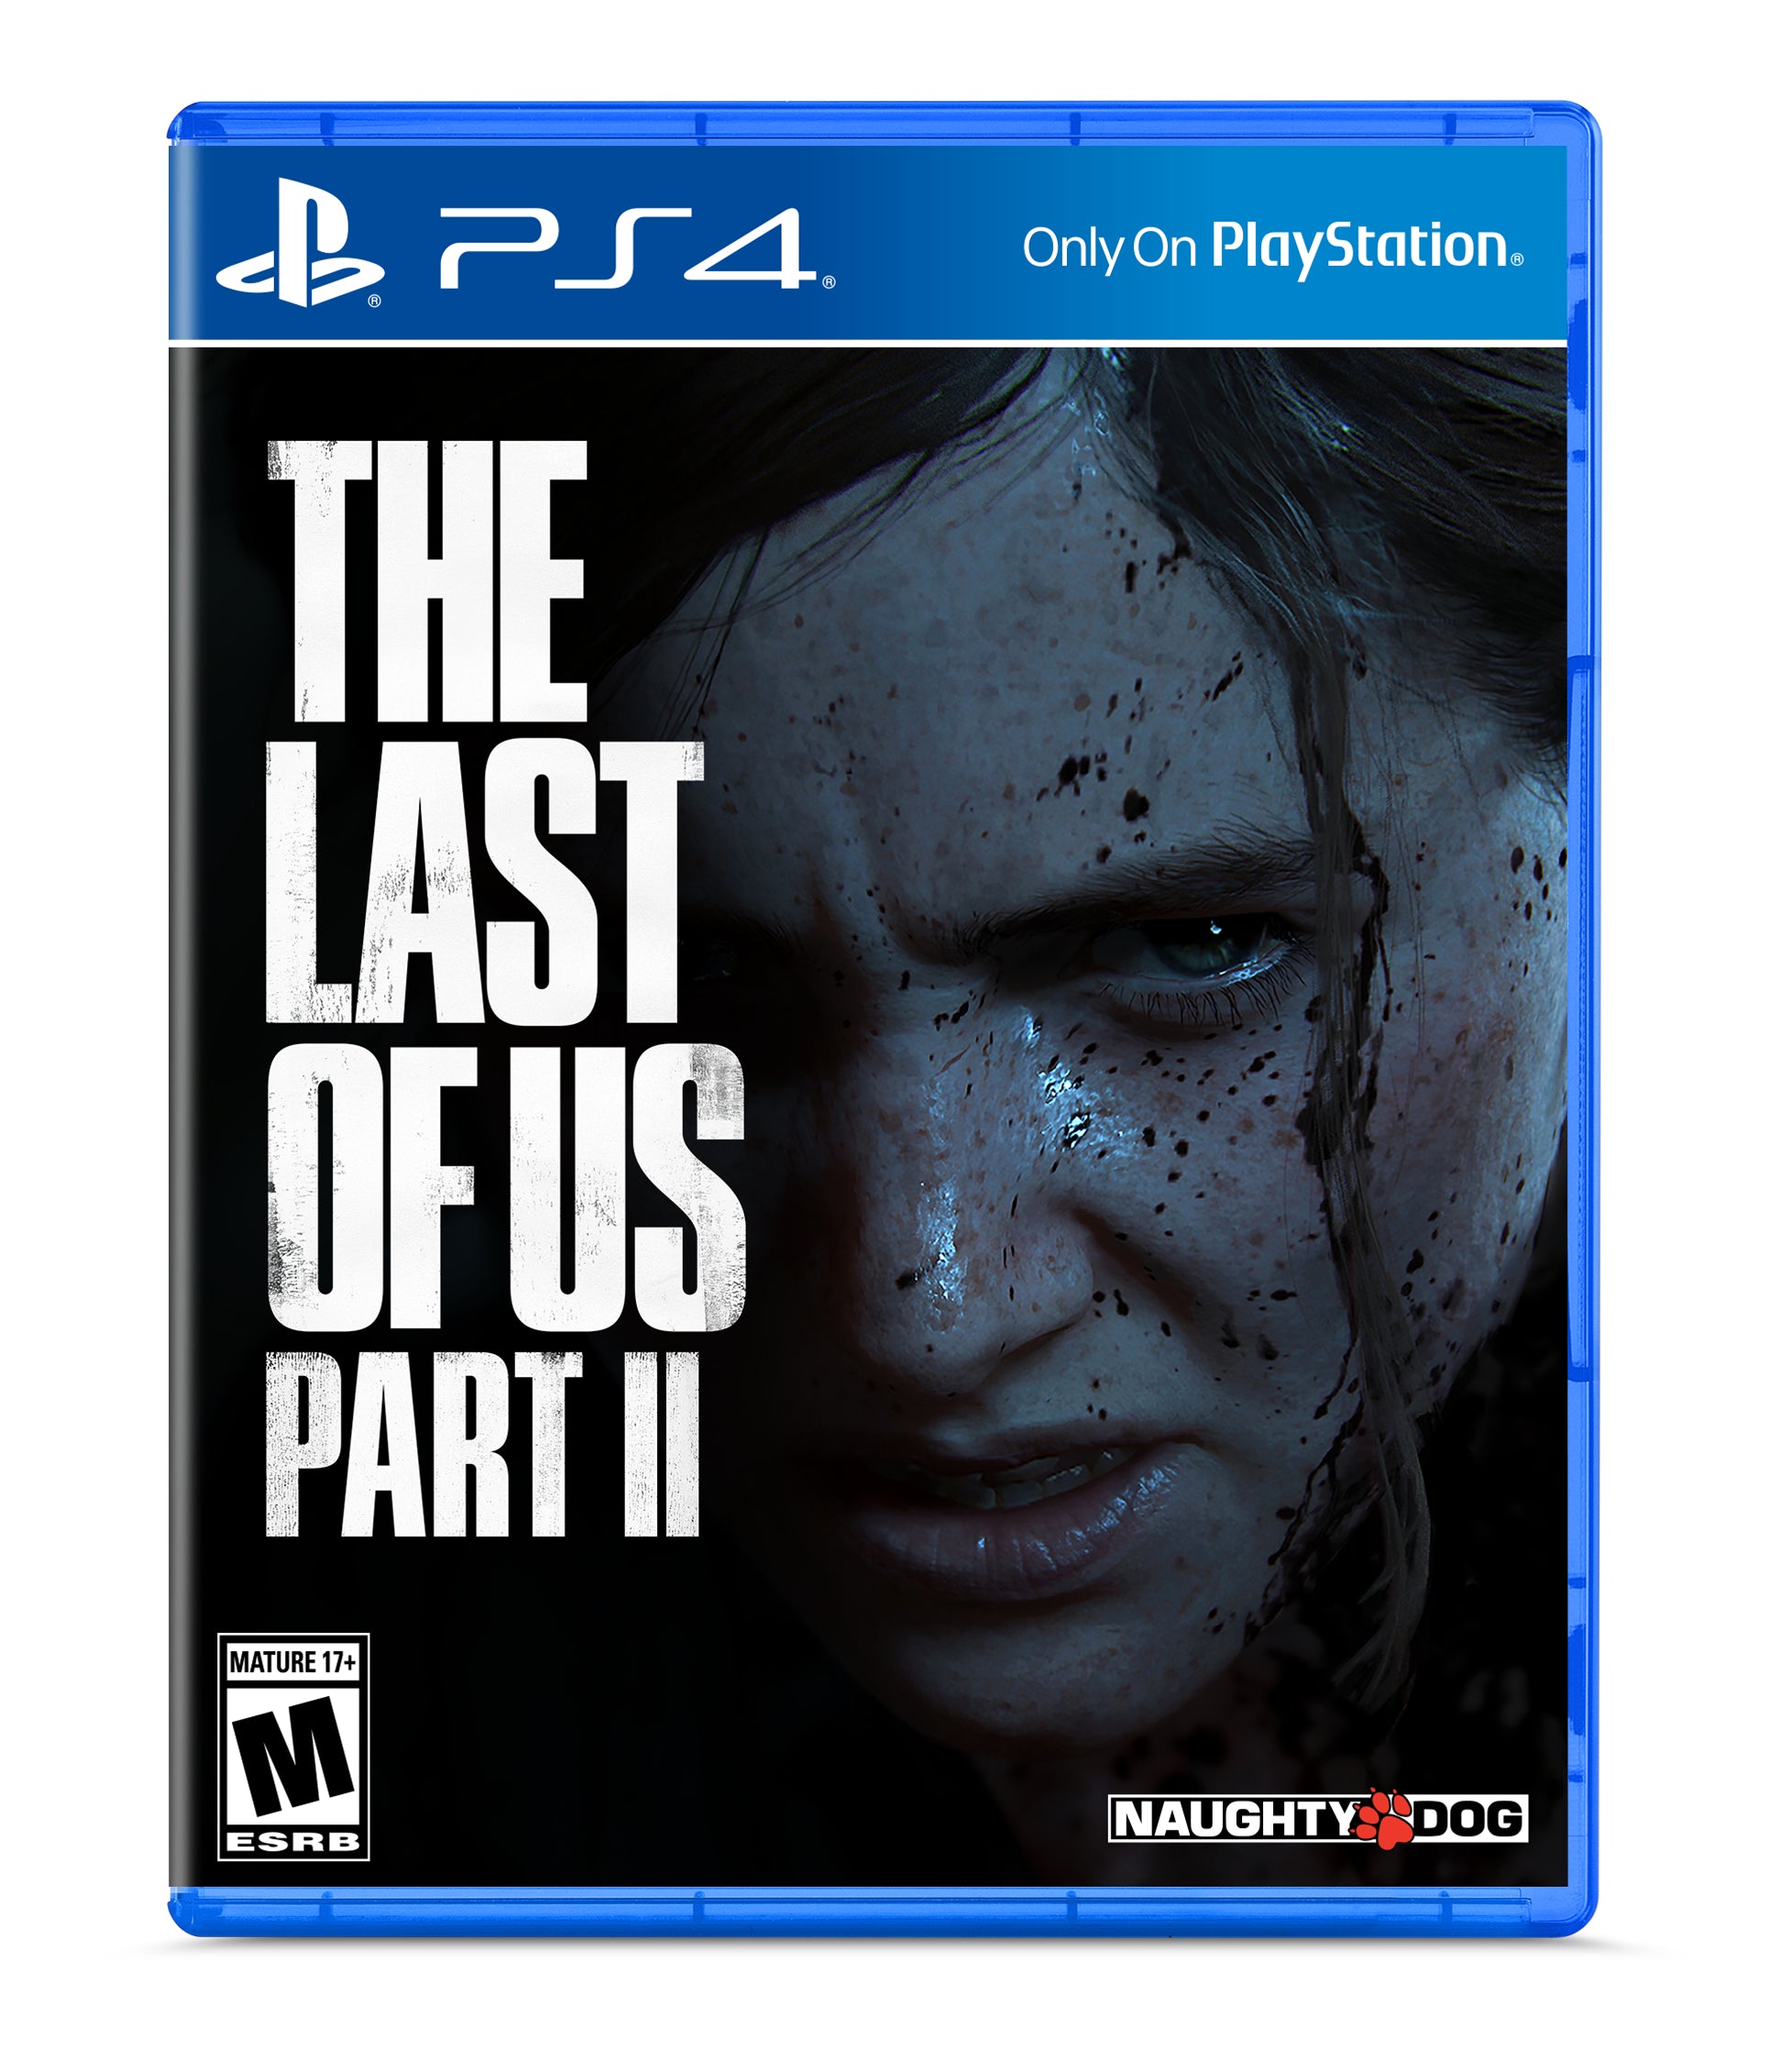 Sony PlayStation 4 Slim The Last of Us Part II Bundle 1TB PS4 Gaming Console, Jet Black, with Mytrix High Speed HDMI